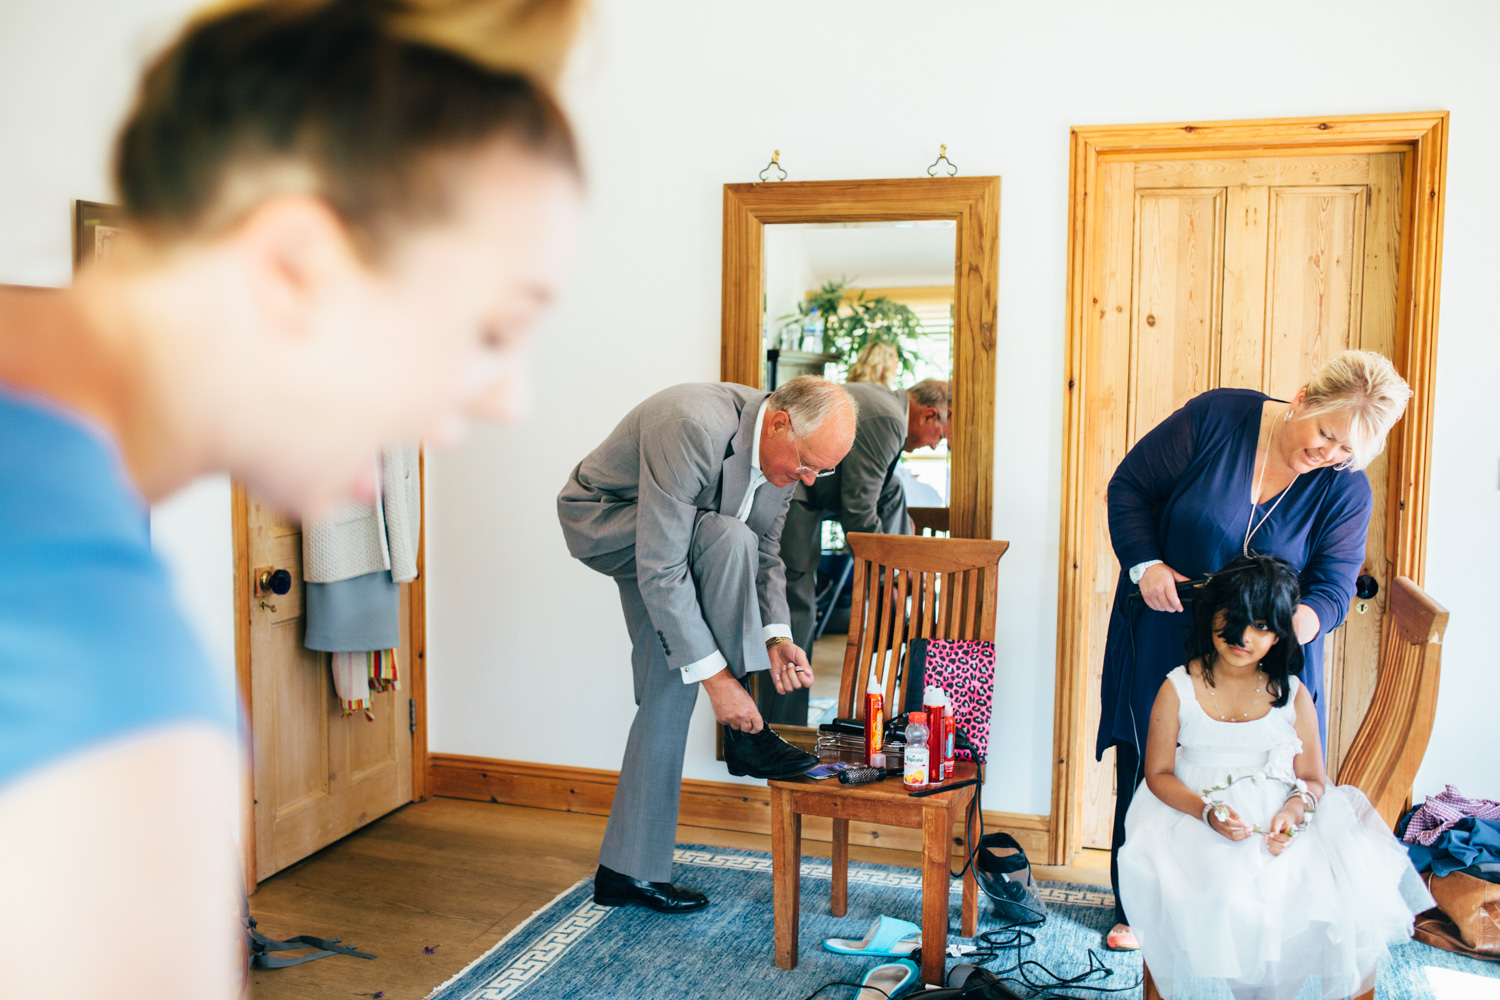 father of the bride wedding photography at chaucer barn norfolk